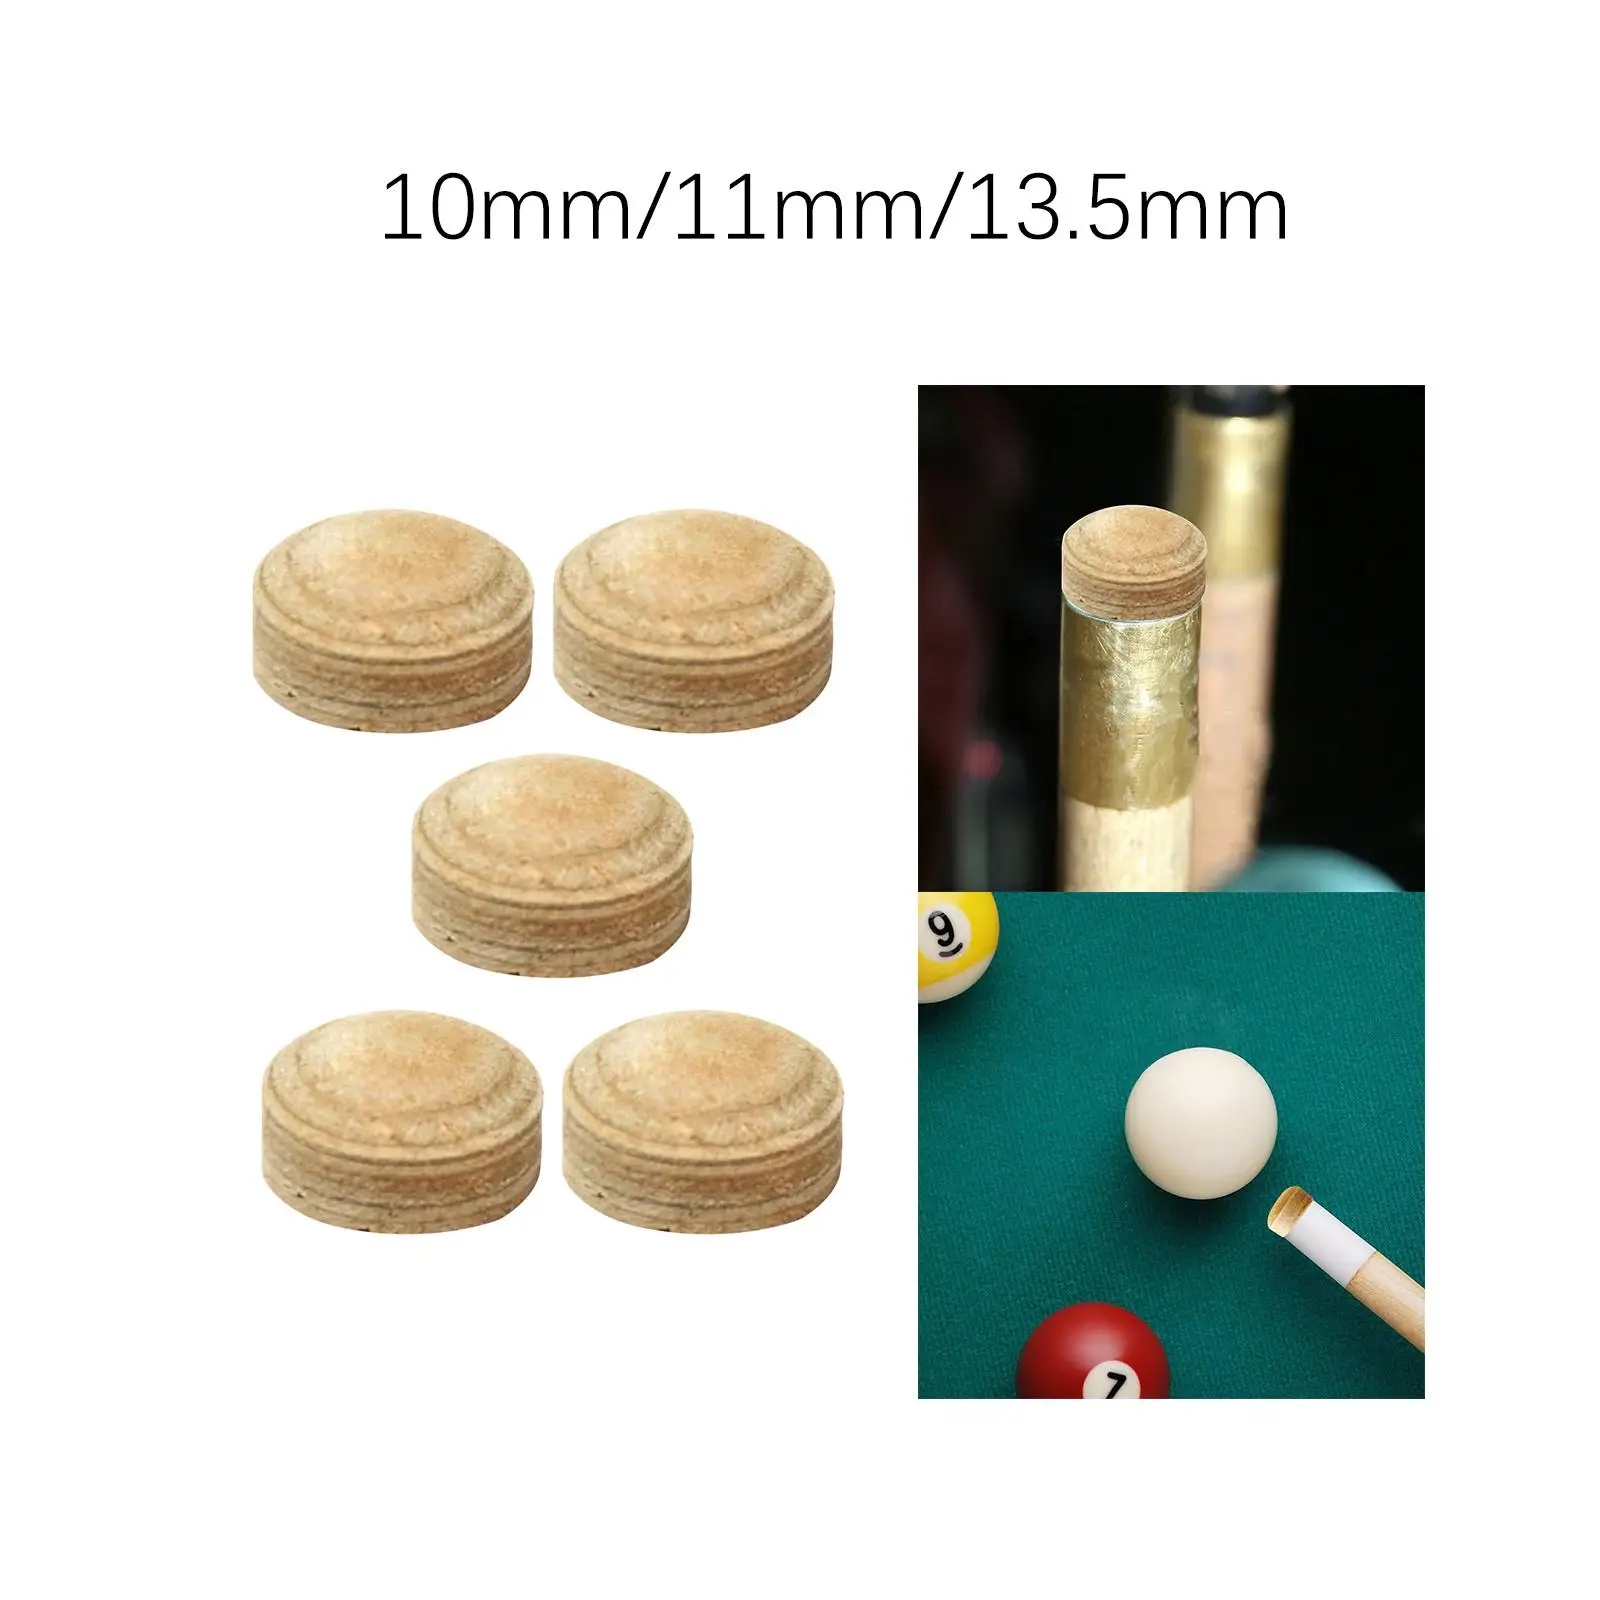 5 Pieces Table Billiards Pool Cue Tips Multi Layered Accessory Protector Repair Kit Artificial Leather for Home Personal Use